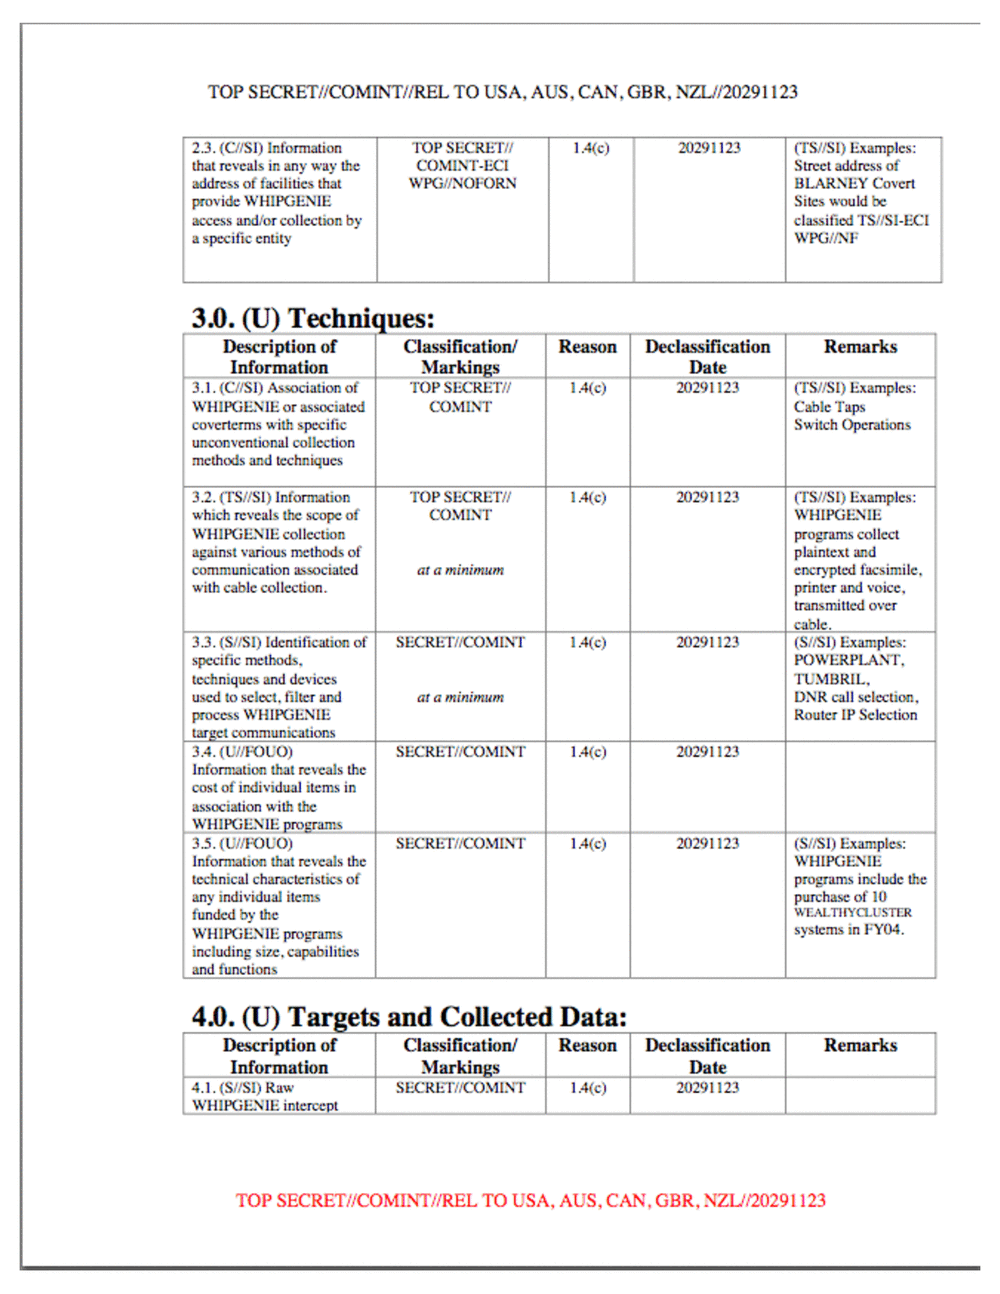 Page 5 from ECI WHIPGENIE Classification Guide